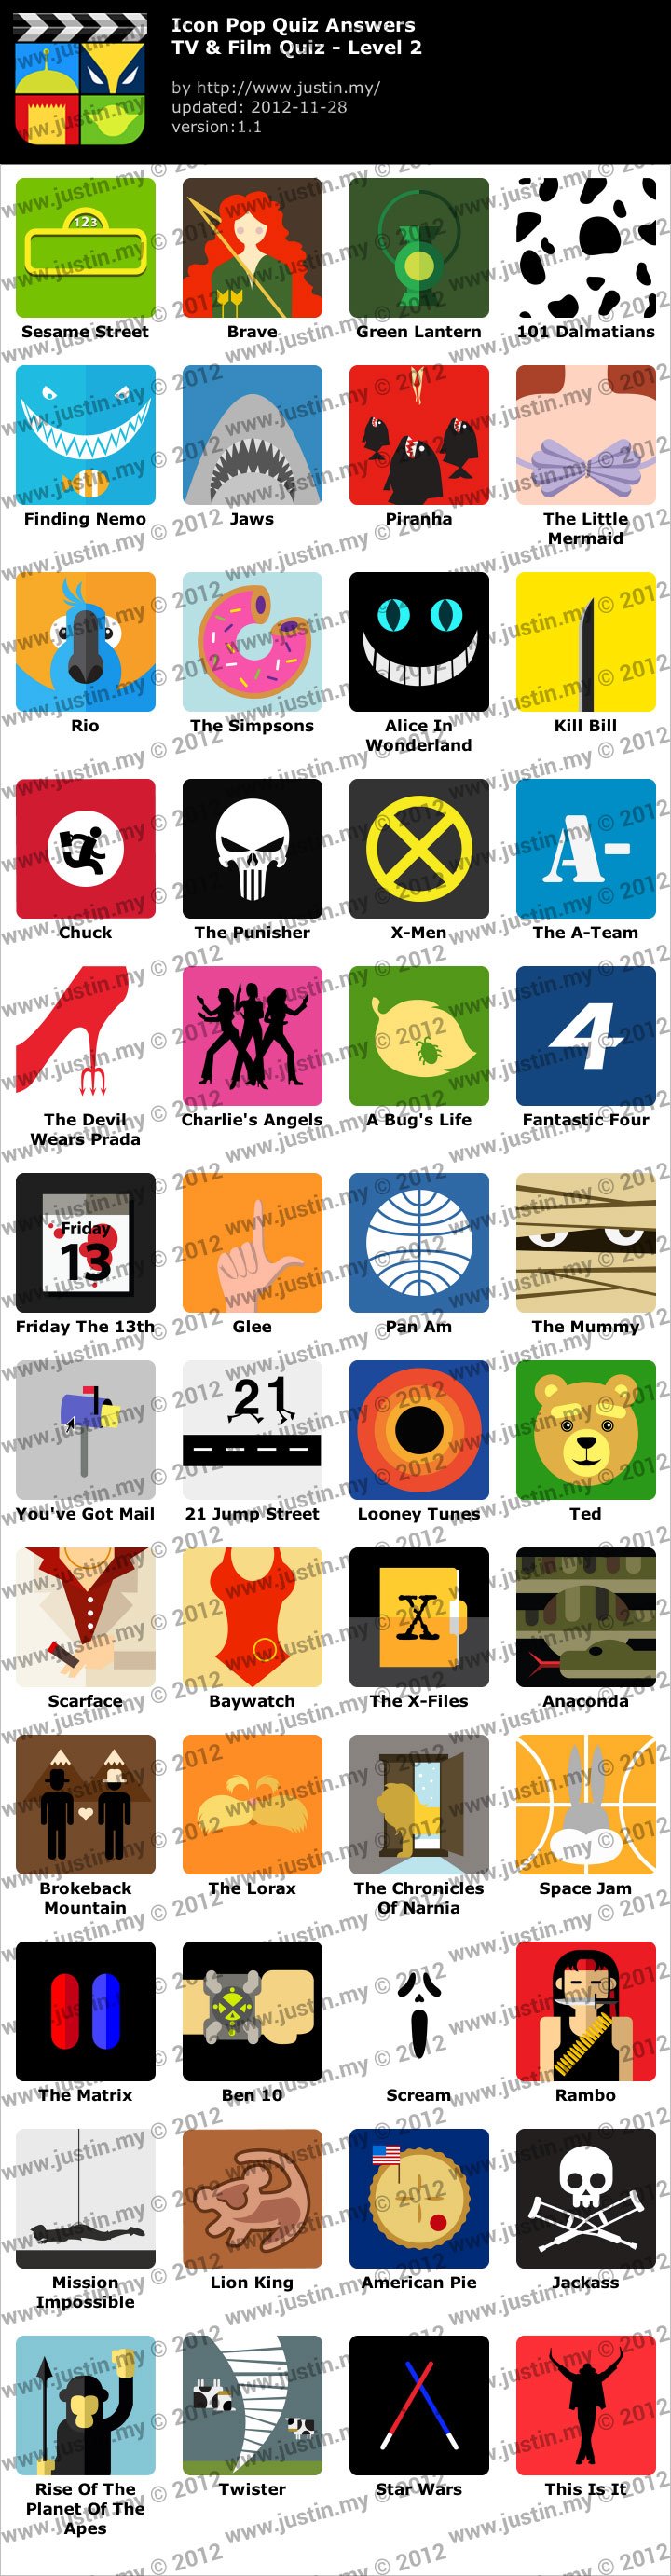 Icon Pop Quiz Answers iPhone, iPad, Android